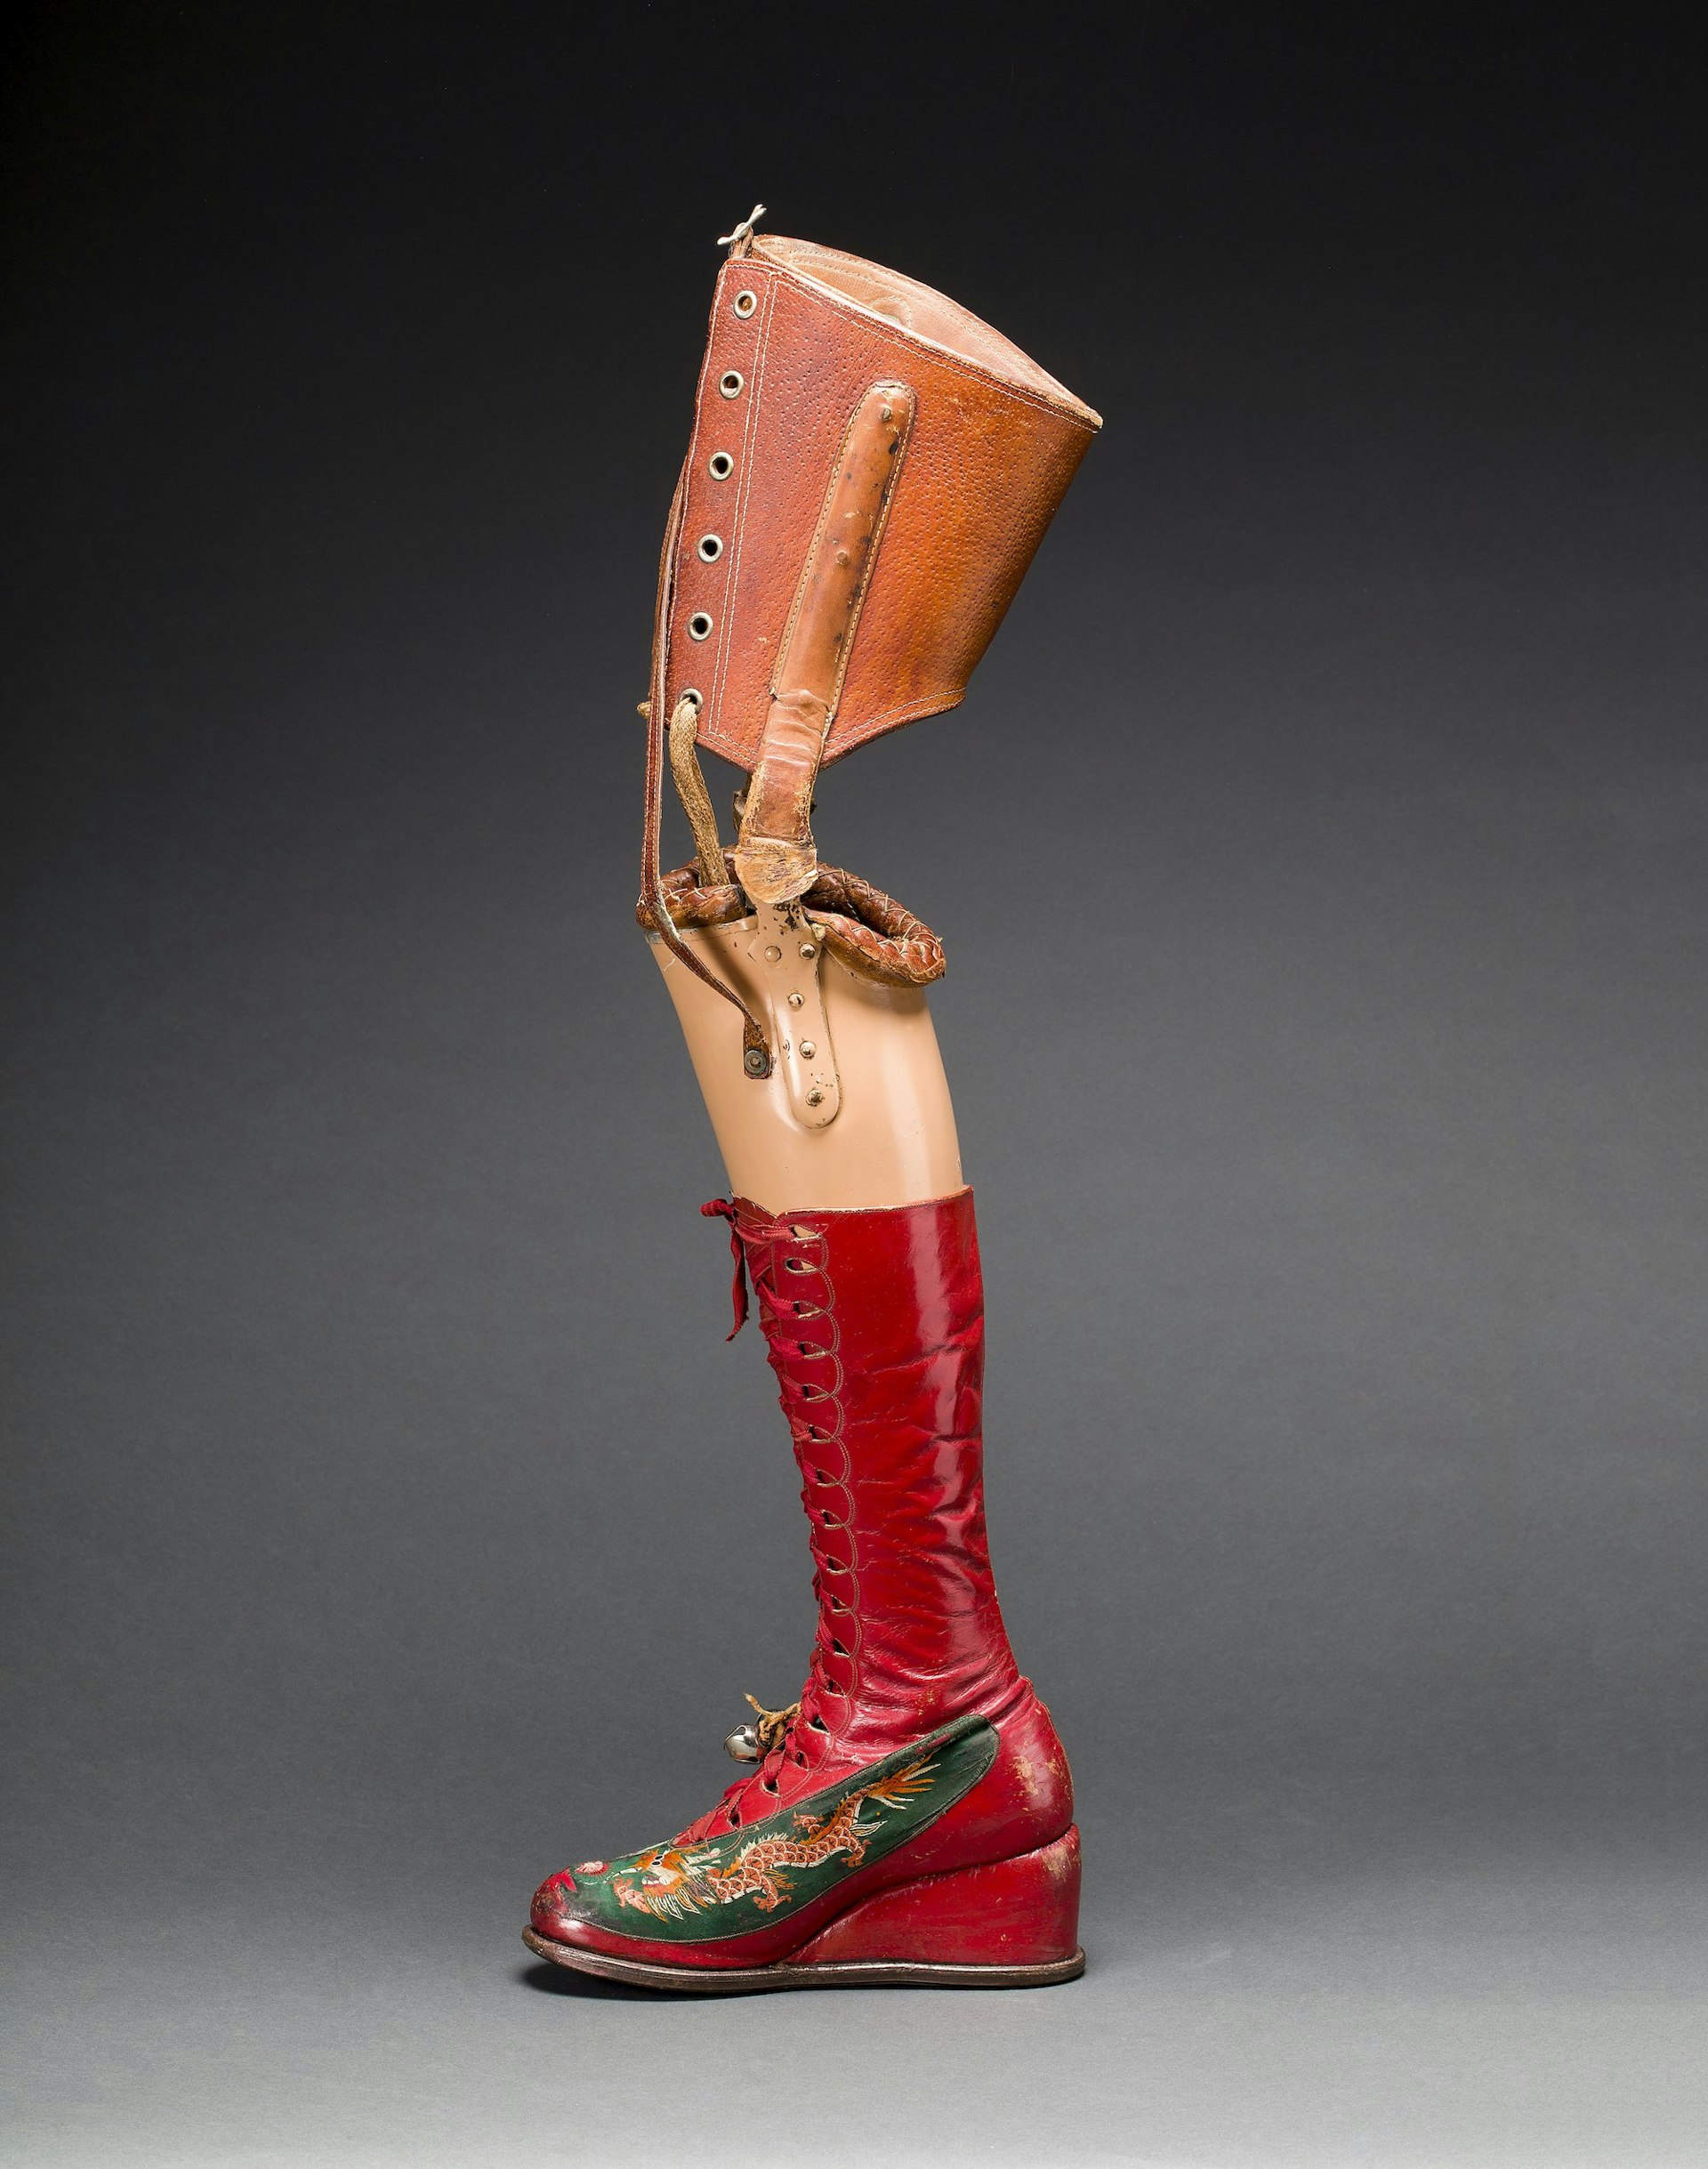 Prosthetic leg with leather boot. Appliquéd silk with embroidered Chinese motifs. Photograph Javier Hinojosa. Museo Frida Kahlo. © Diego Riviera and Frida Kahlo Archives, Banco de México, Fiduciary of the Trust of the Diego Riviera and Frida Kahlo Museums